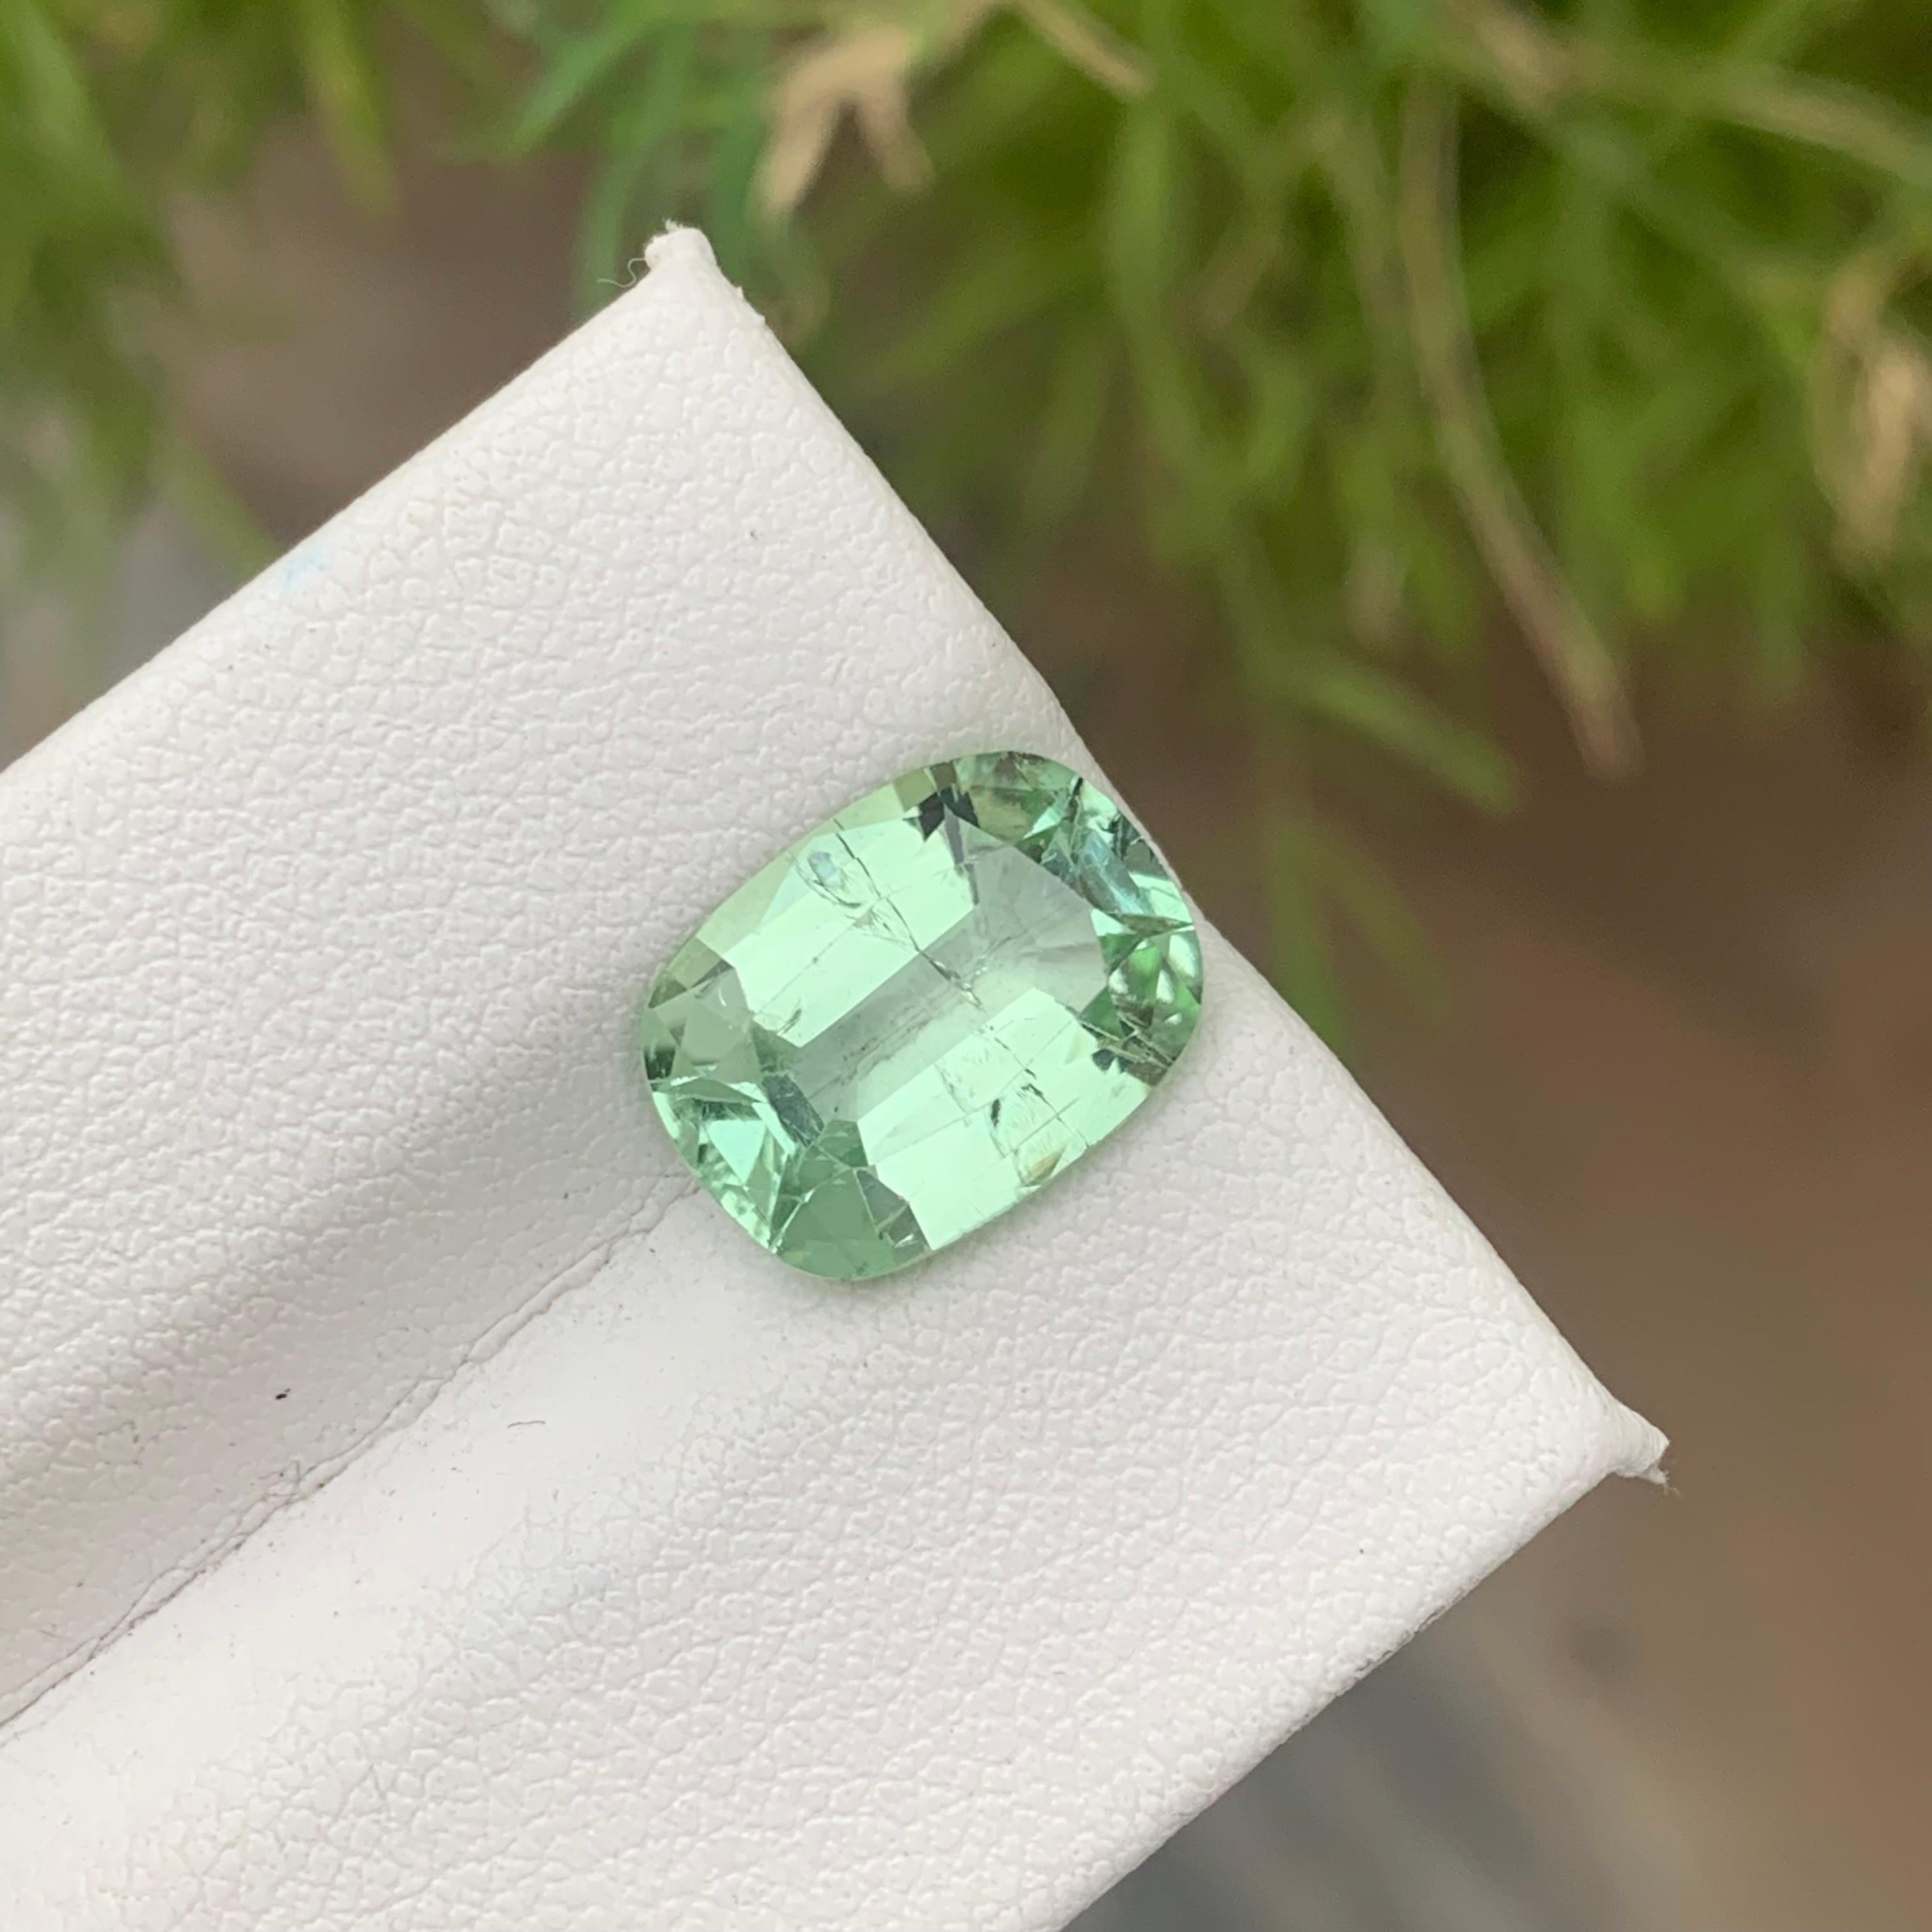 Arts and Crafts 4.50 Carat Natural Faceted Mint Green Tourmaline October Birthstone For Sale